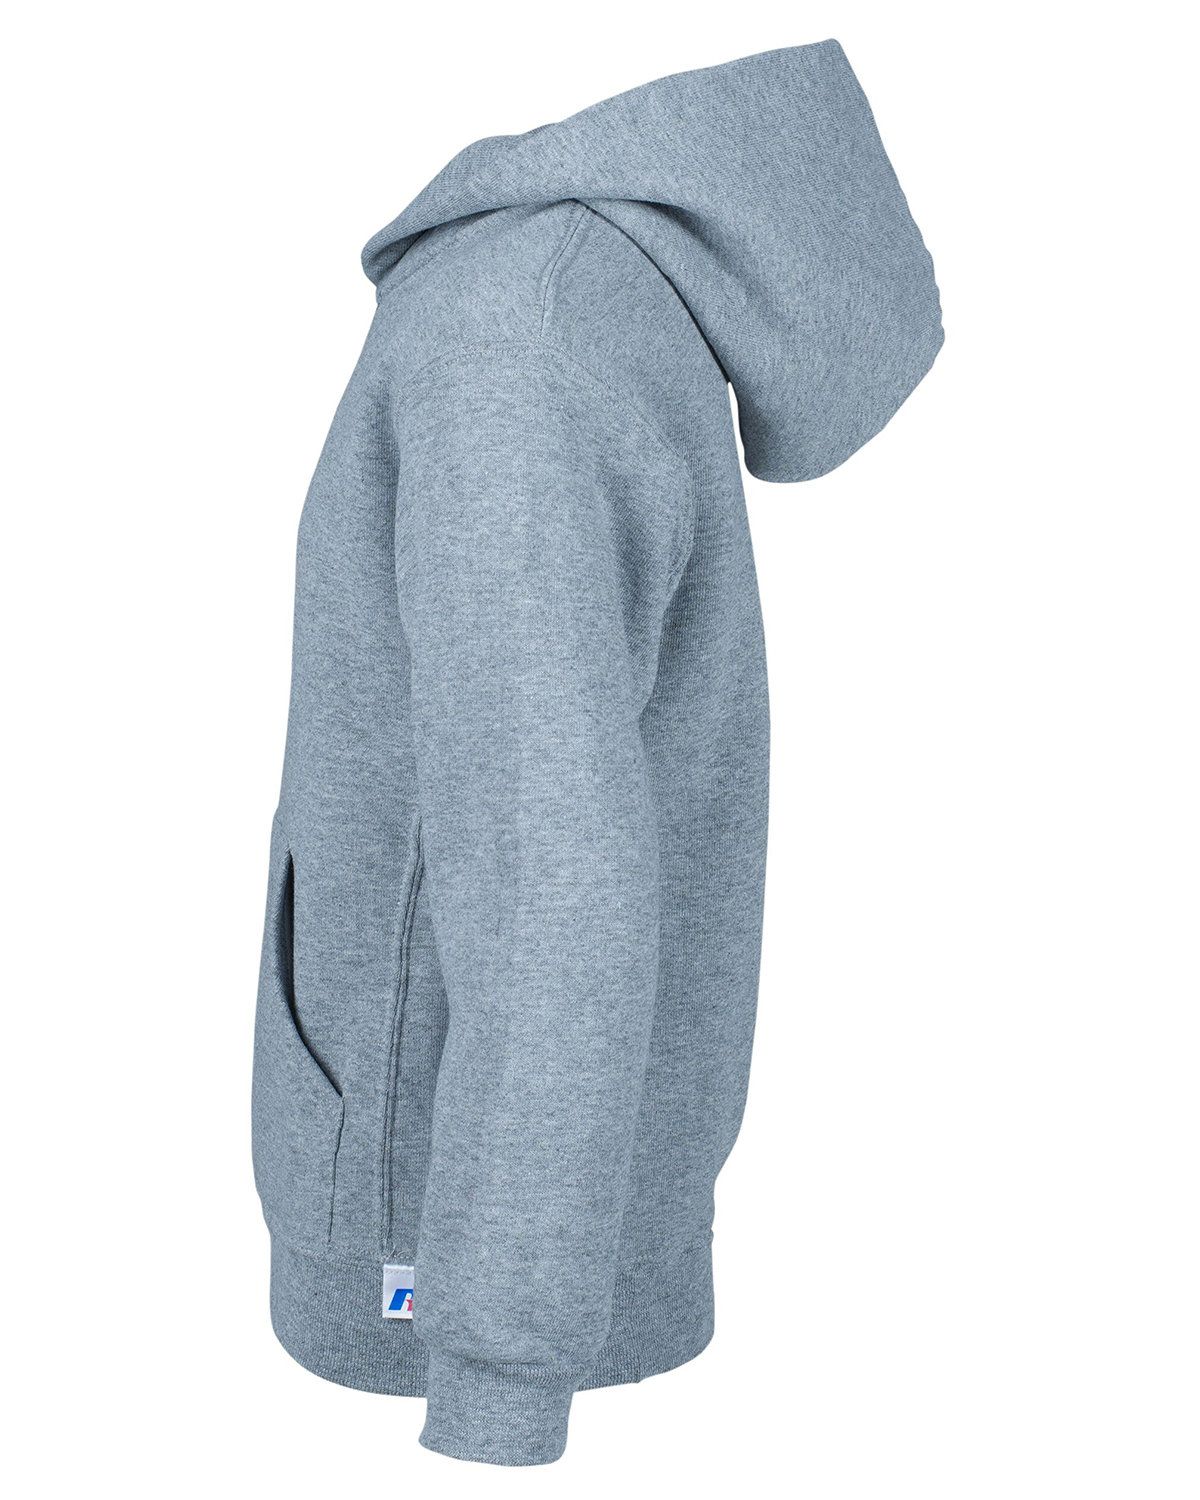 'Russell Athletic 995HBB-RRV Youth Dri Power Hooded Pullover Sweatshirt'